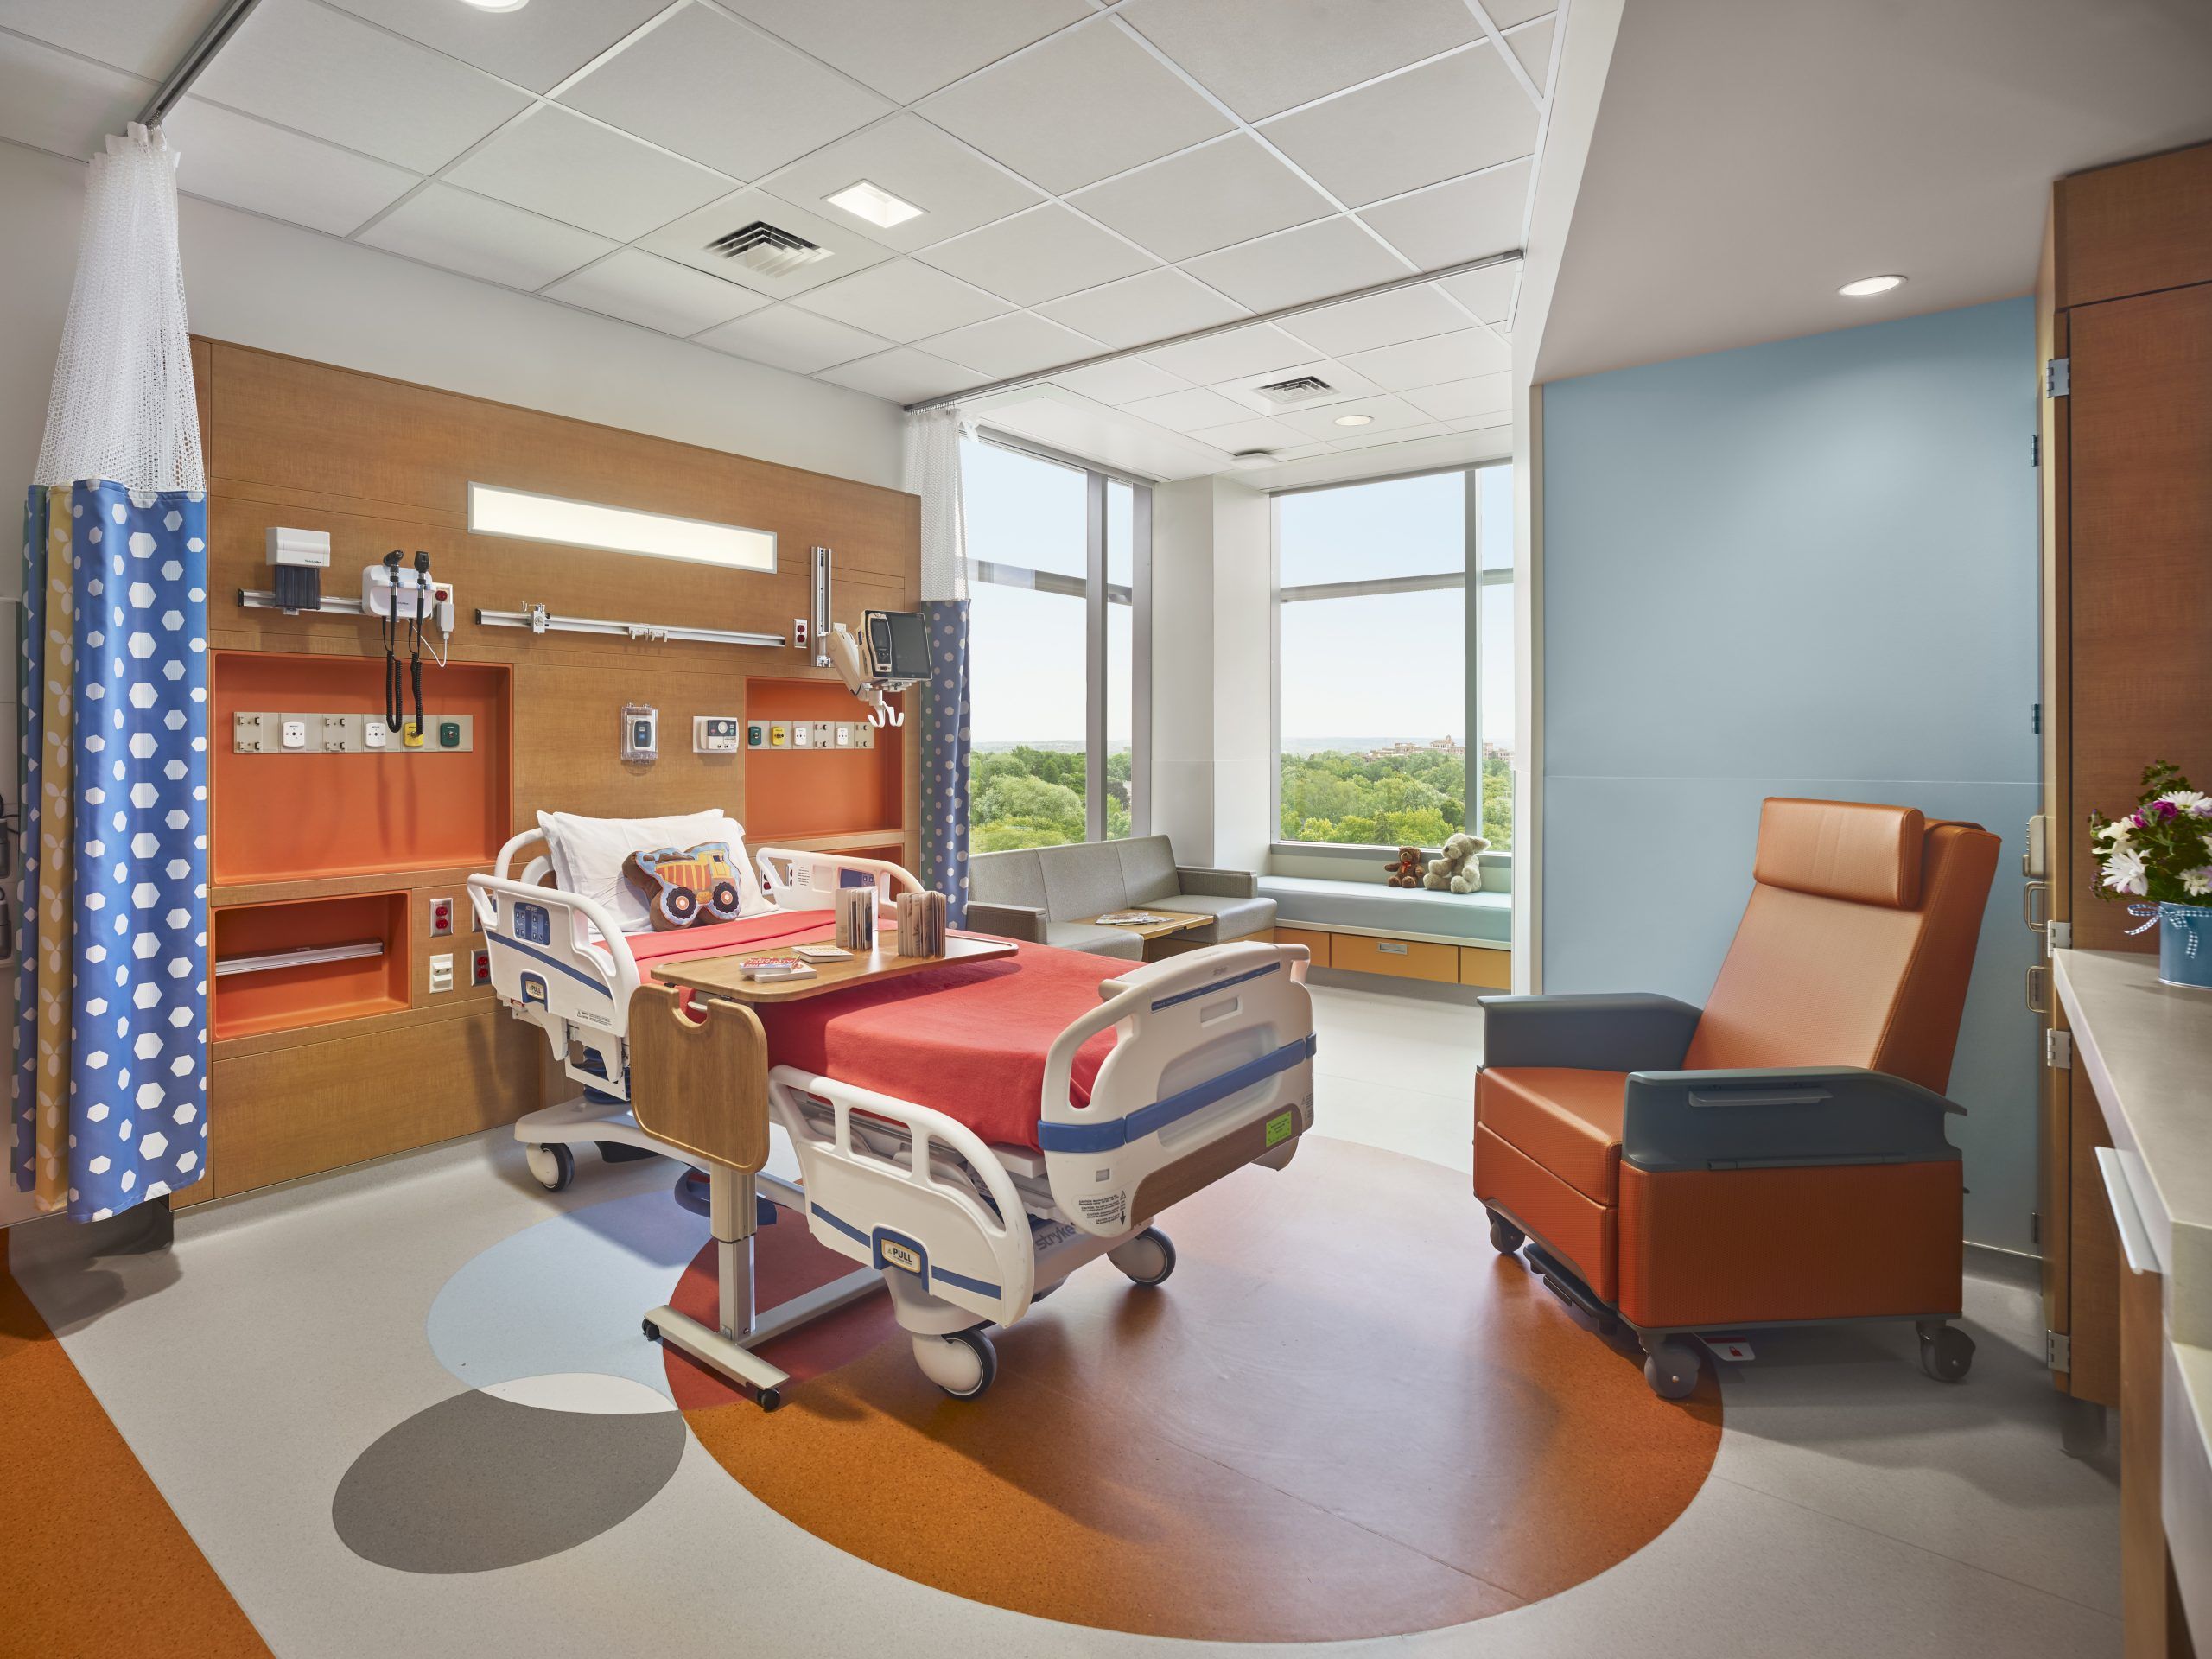 Pediatric patient room with red and blue train theming and long view out over medical campus